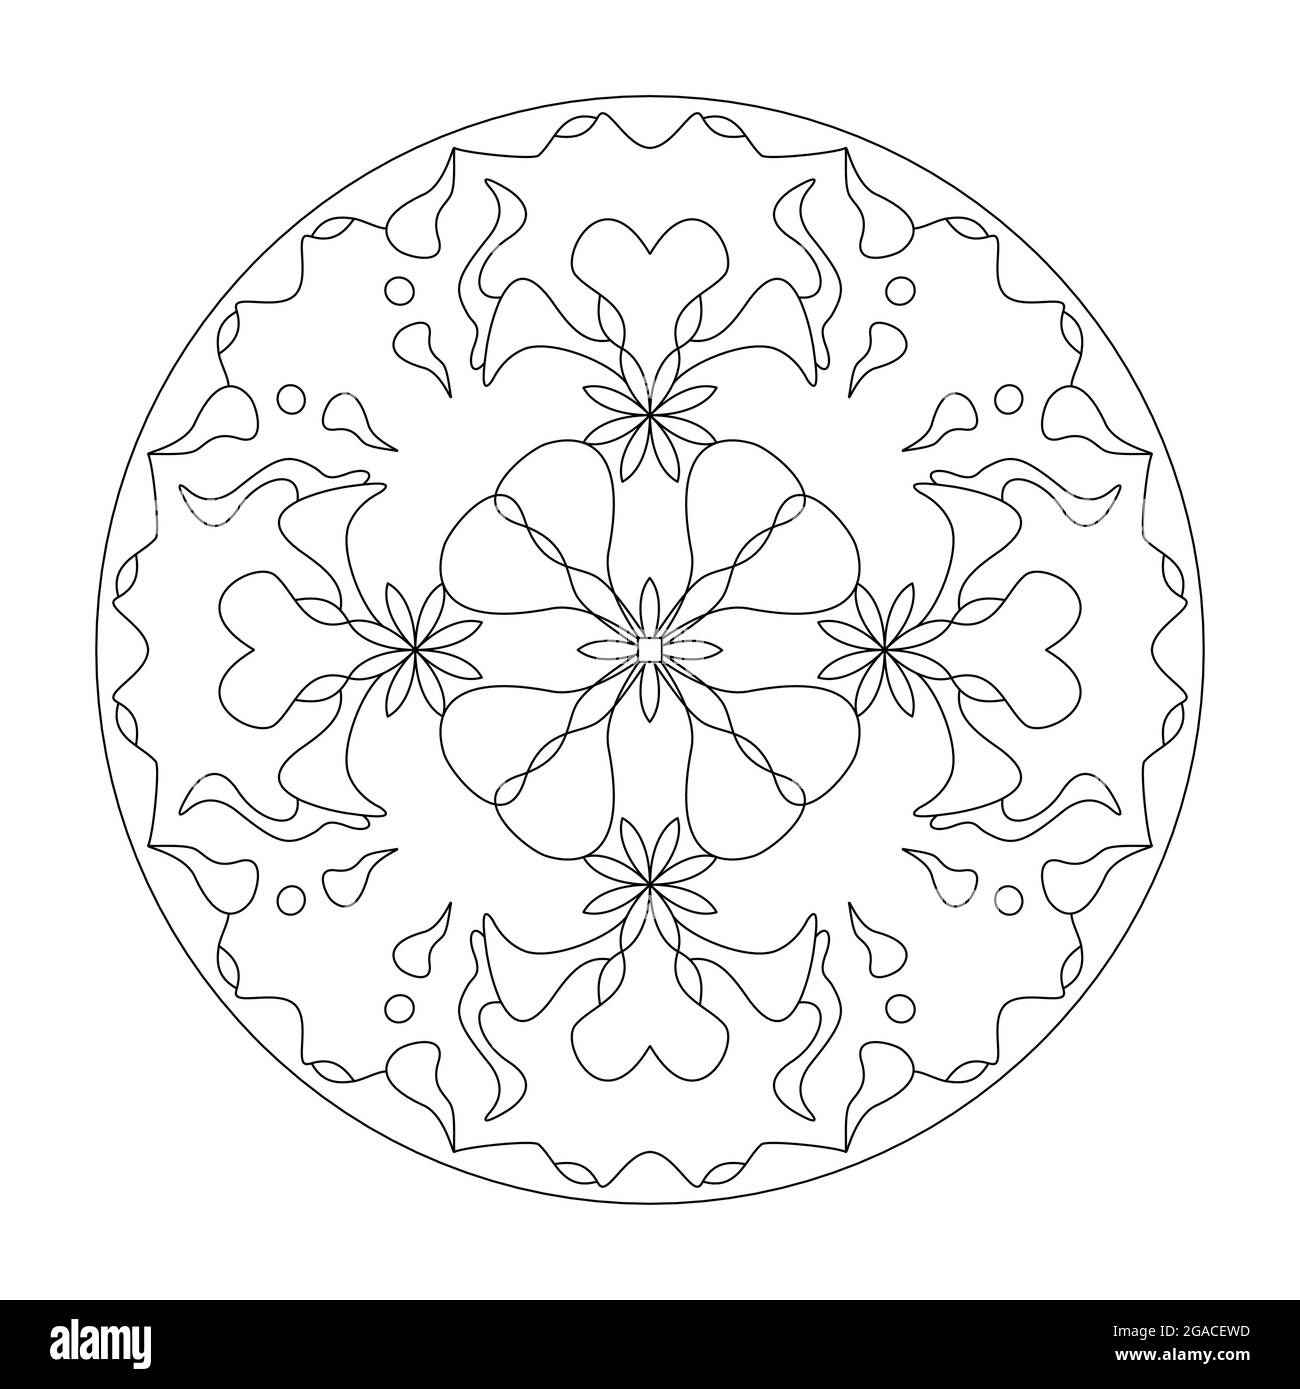 Mandala. Hearts and little flowers. Anti-stress coloring page. Art Therapy. Vector illustration black and white. Stock Vector